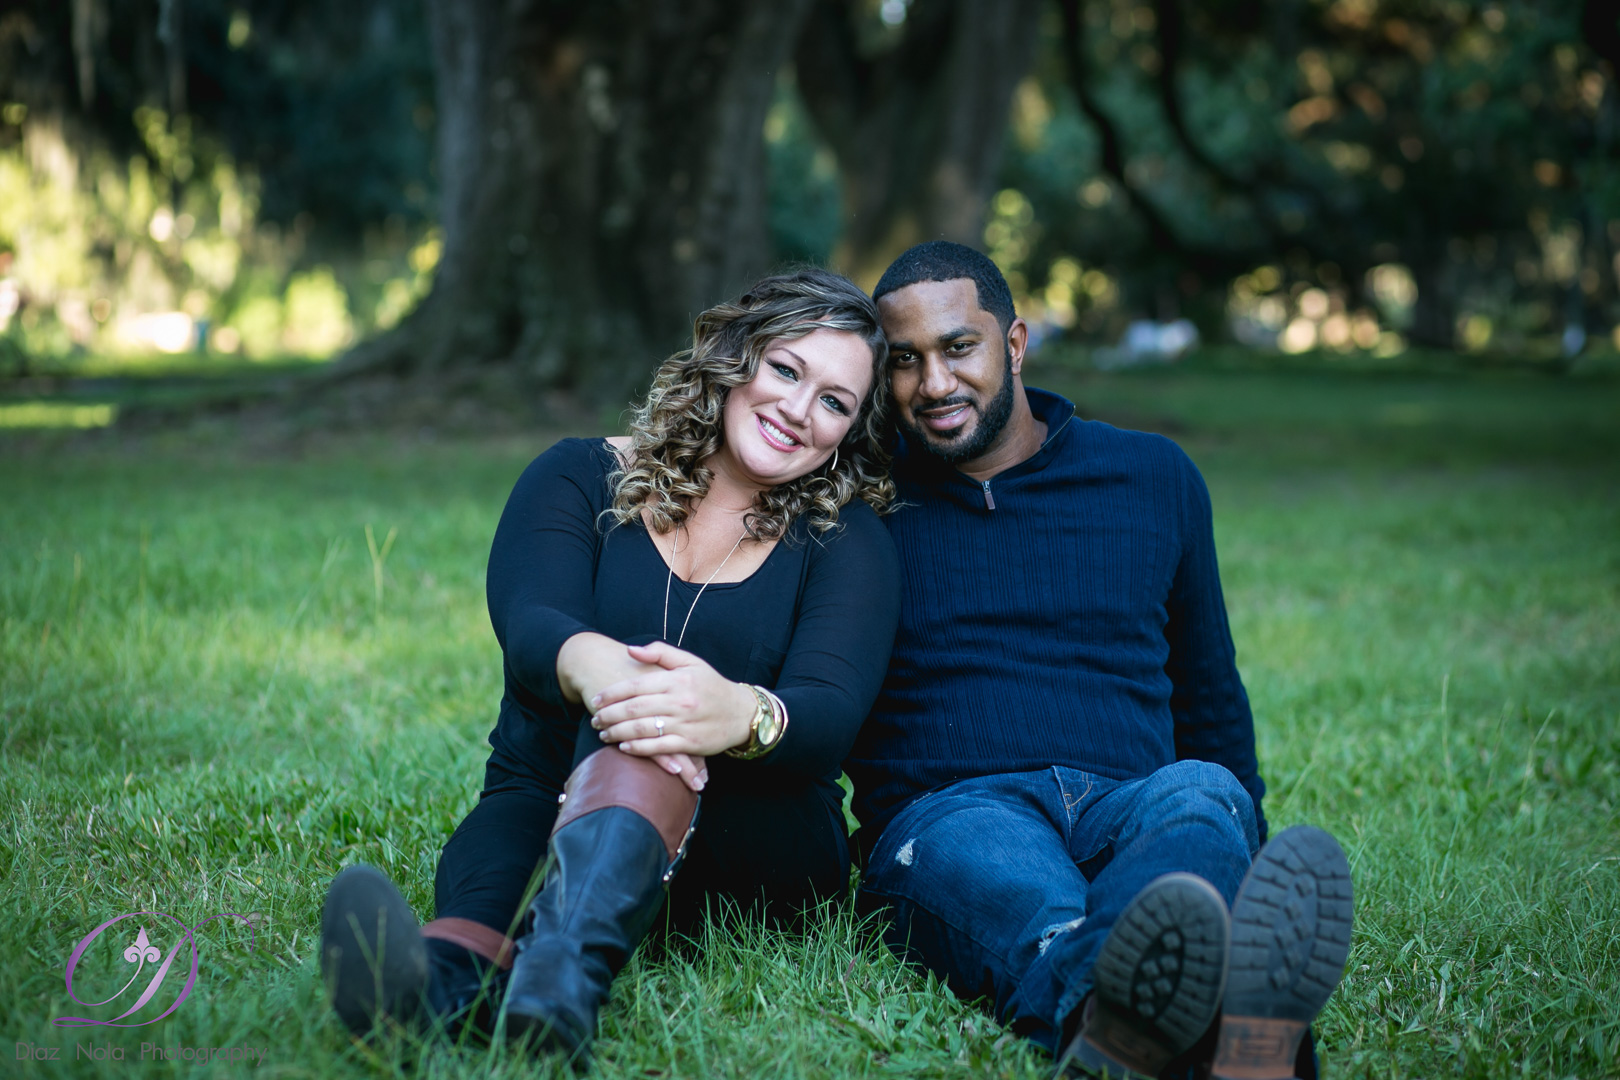 Emilyn & Justin Engagement Portrait Photography (15 of 22)